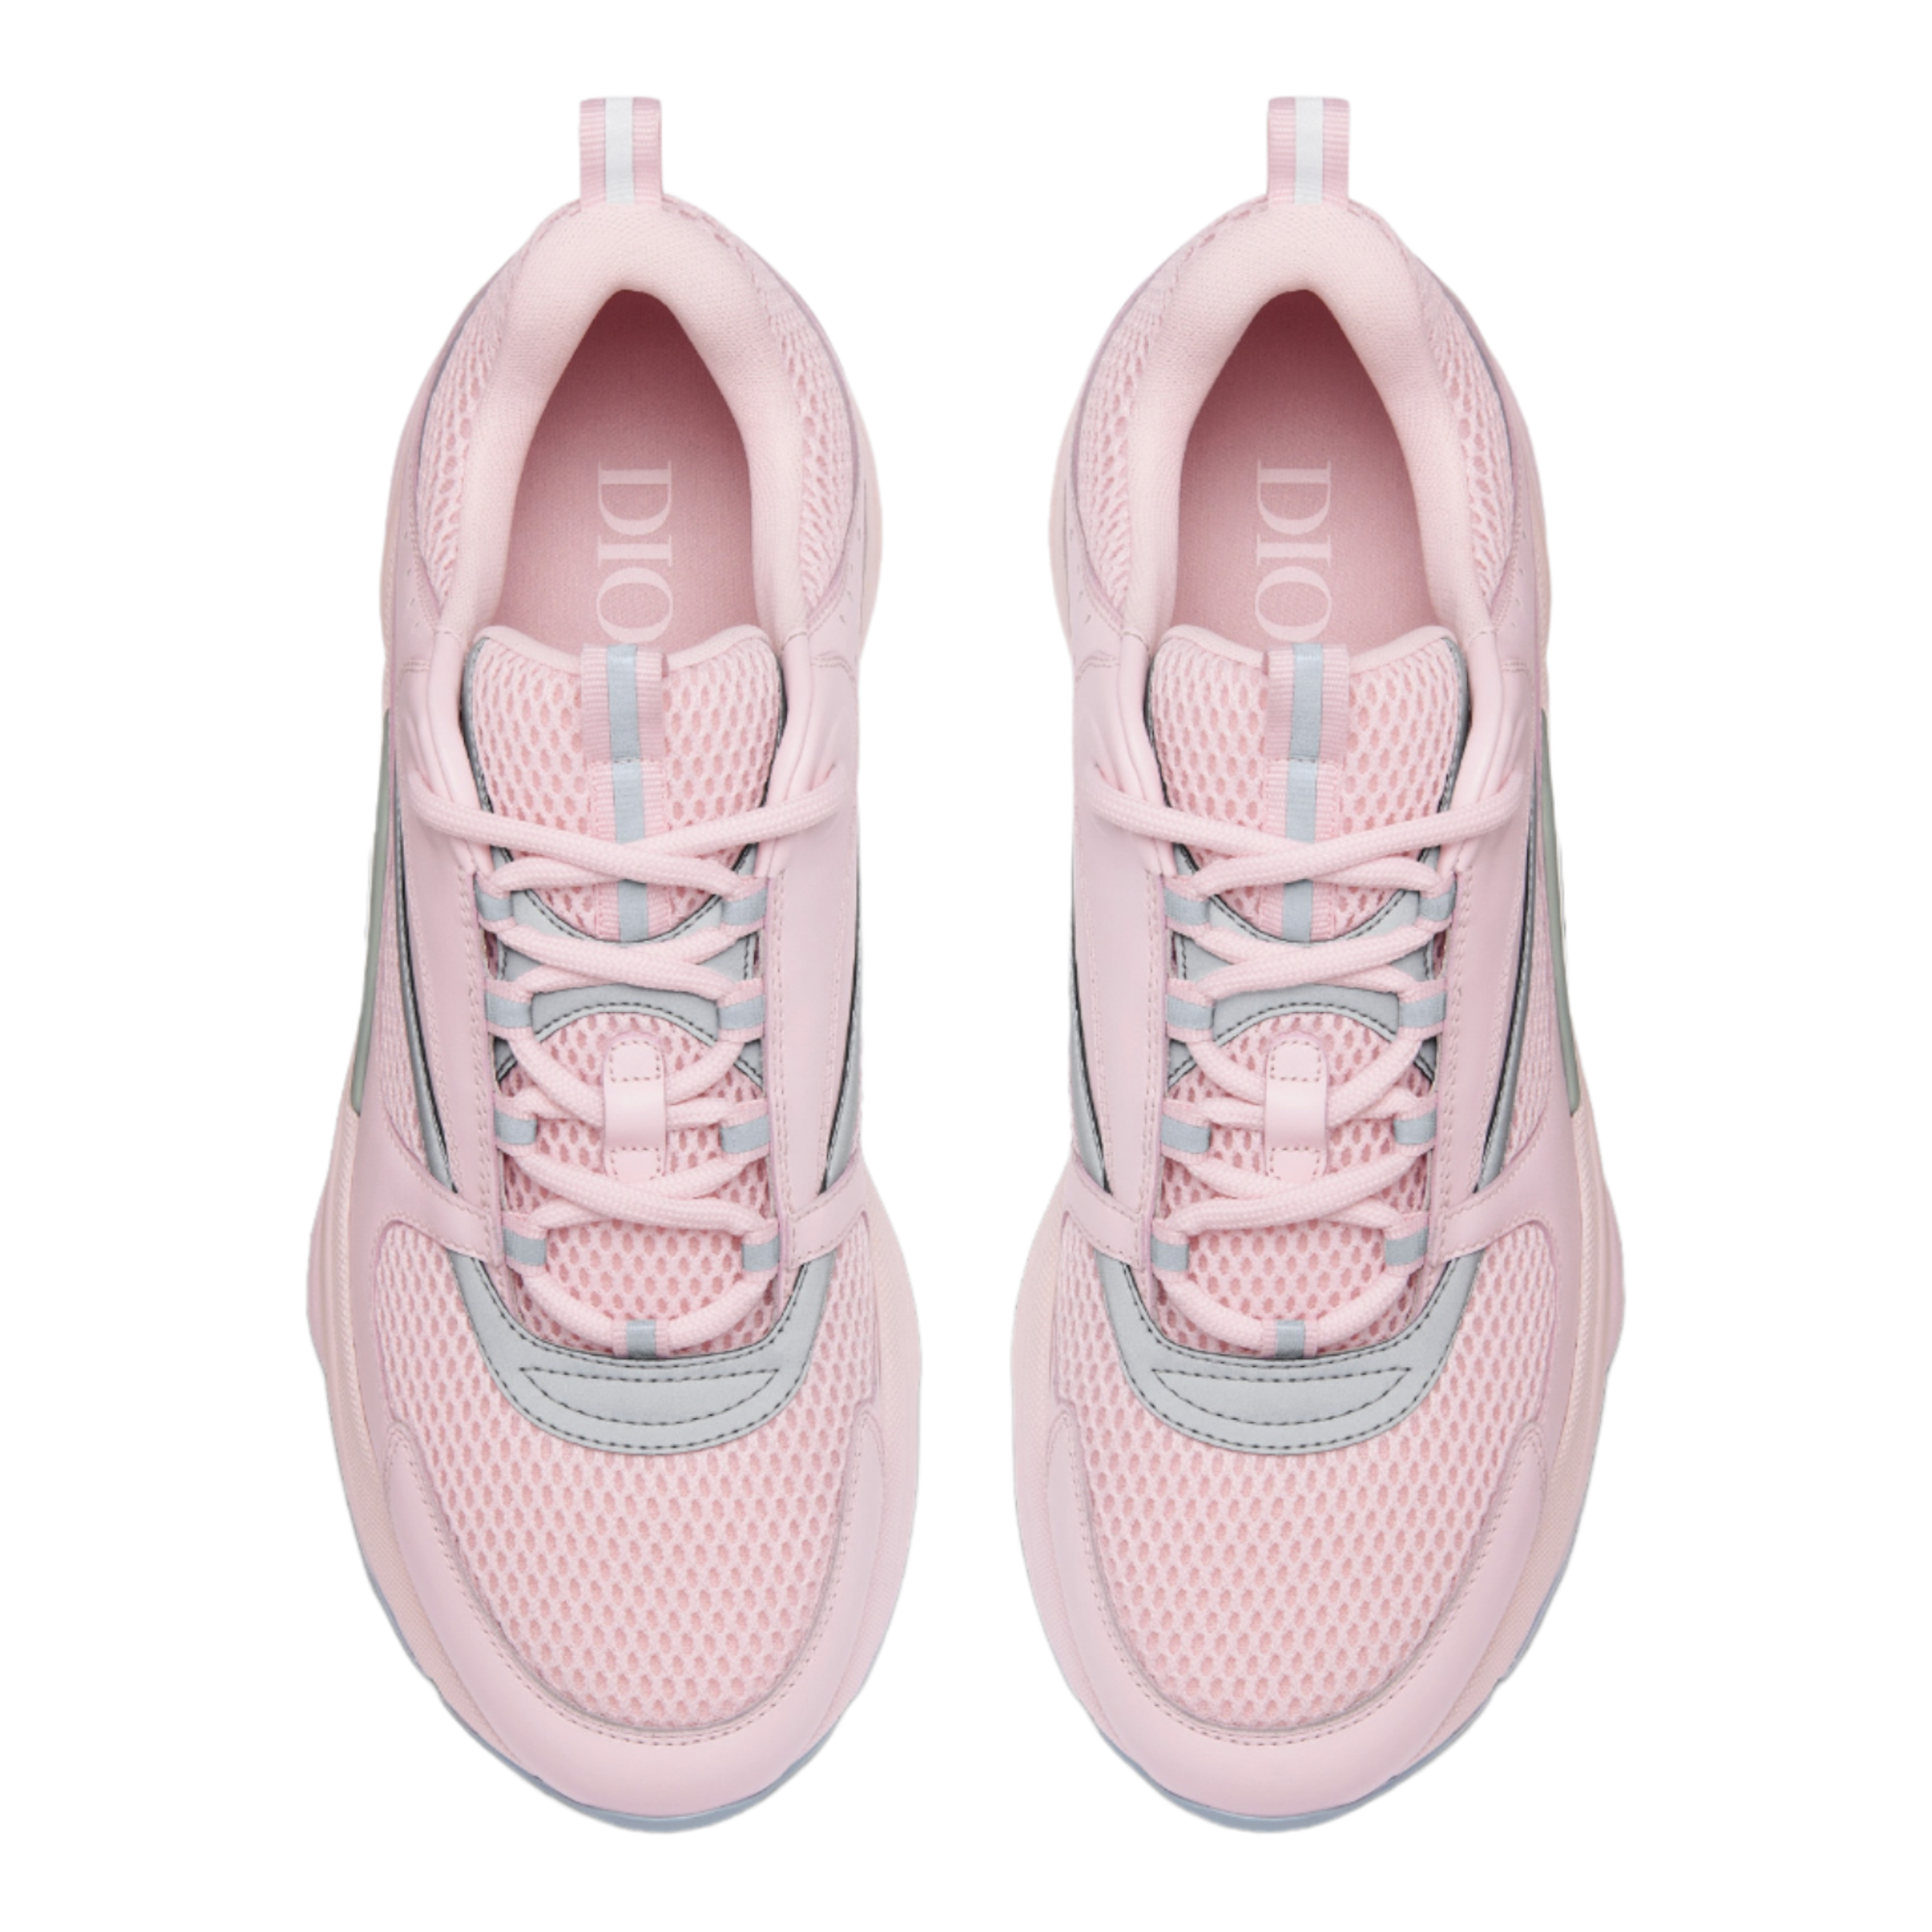 Alternate View 3 of Dior B22 Trainer Pink Silver